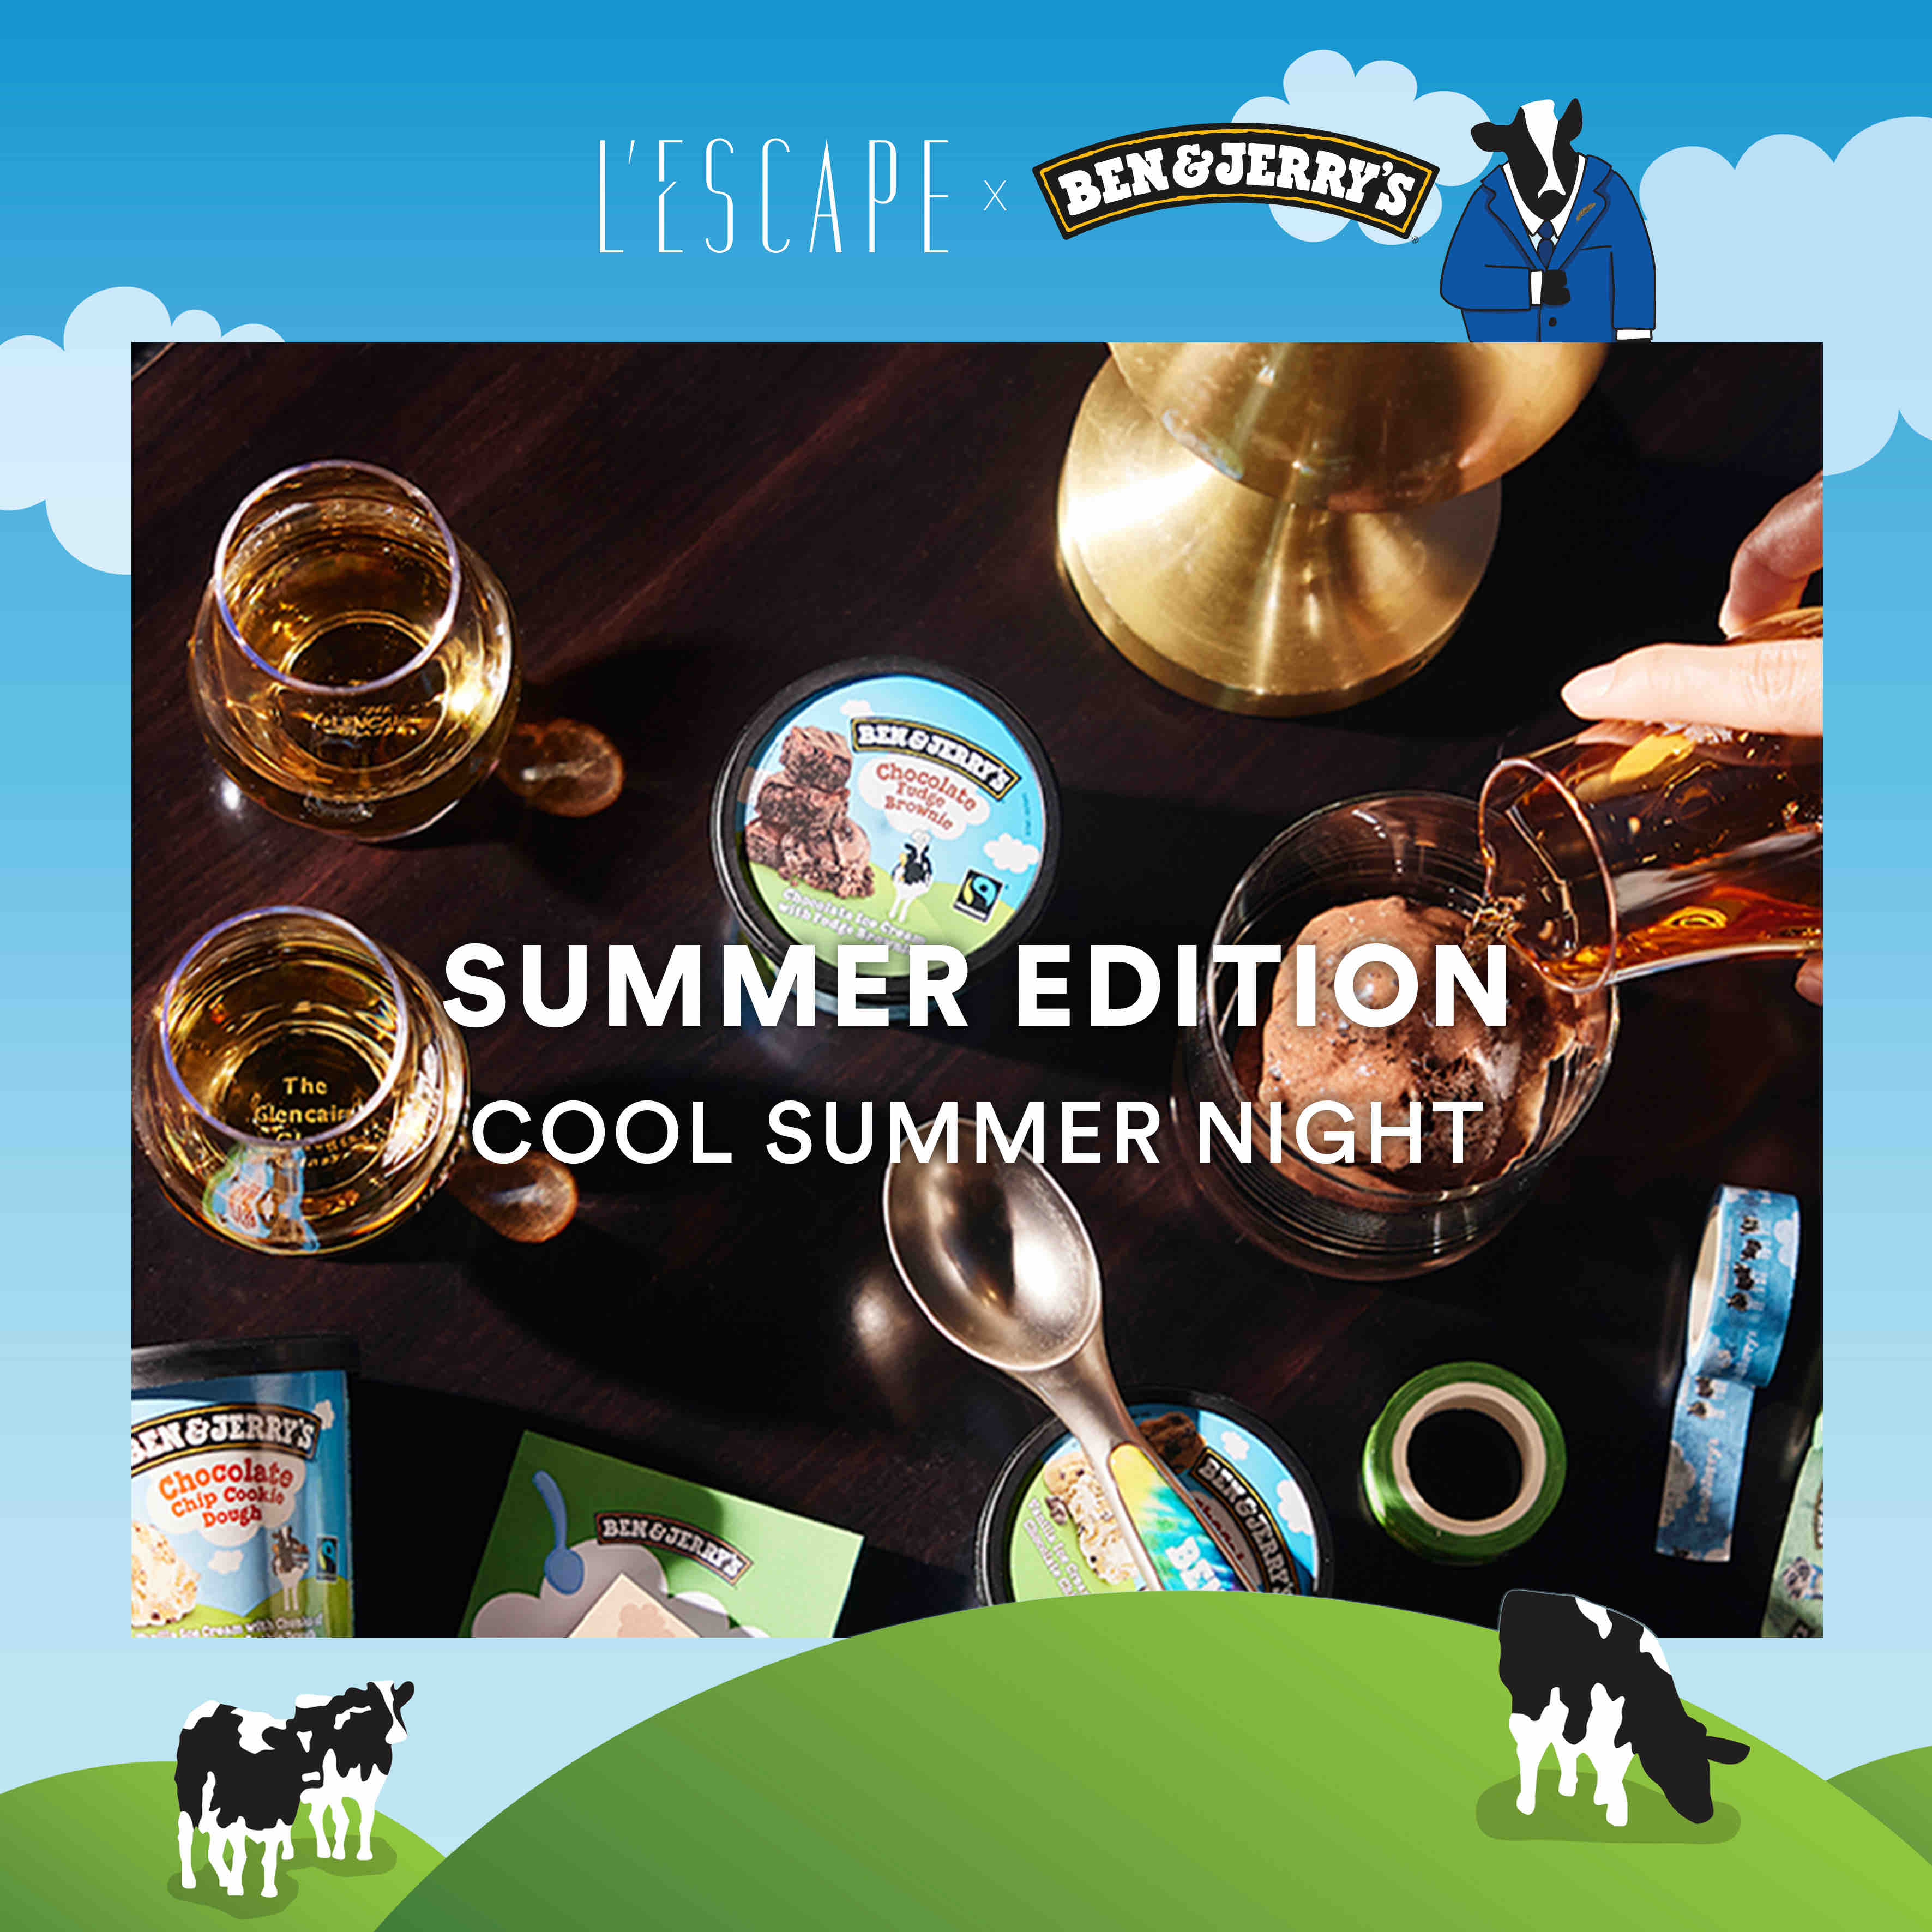 Cool Summer Night<br>with Ben&Jerry's